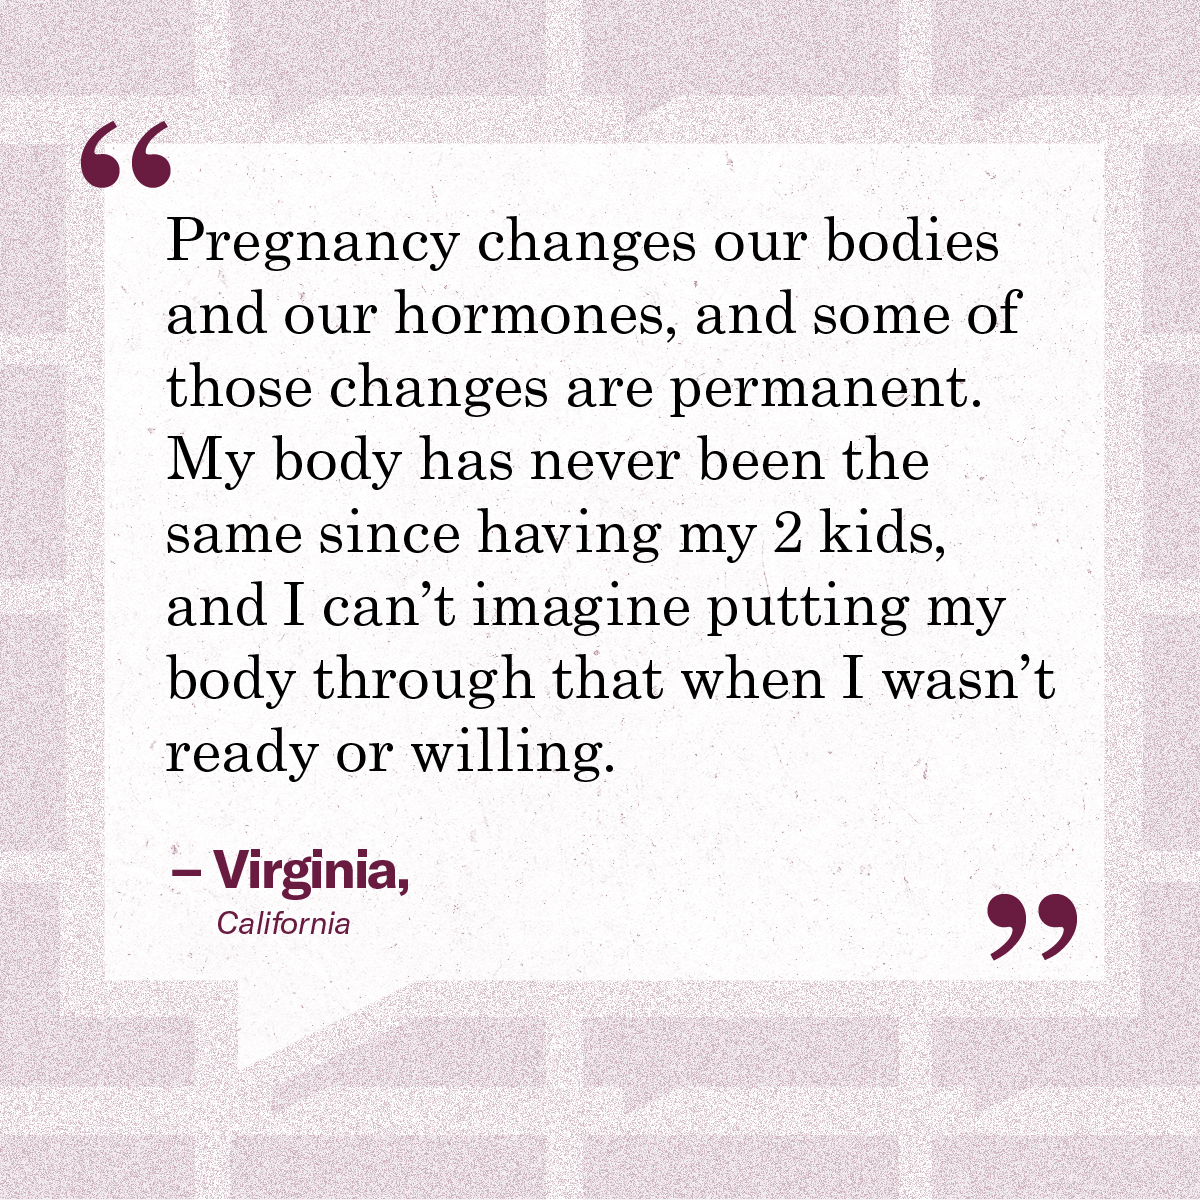 “Pregnancy changes our bodies and our hormones, and some of those changes are permanent. My body has never been the same since having my 2 kids, and I can’t imagine putting my body through that when I wasn’t ready or willing.” – Virginia, California